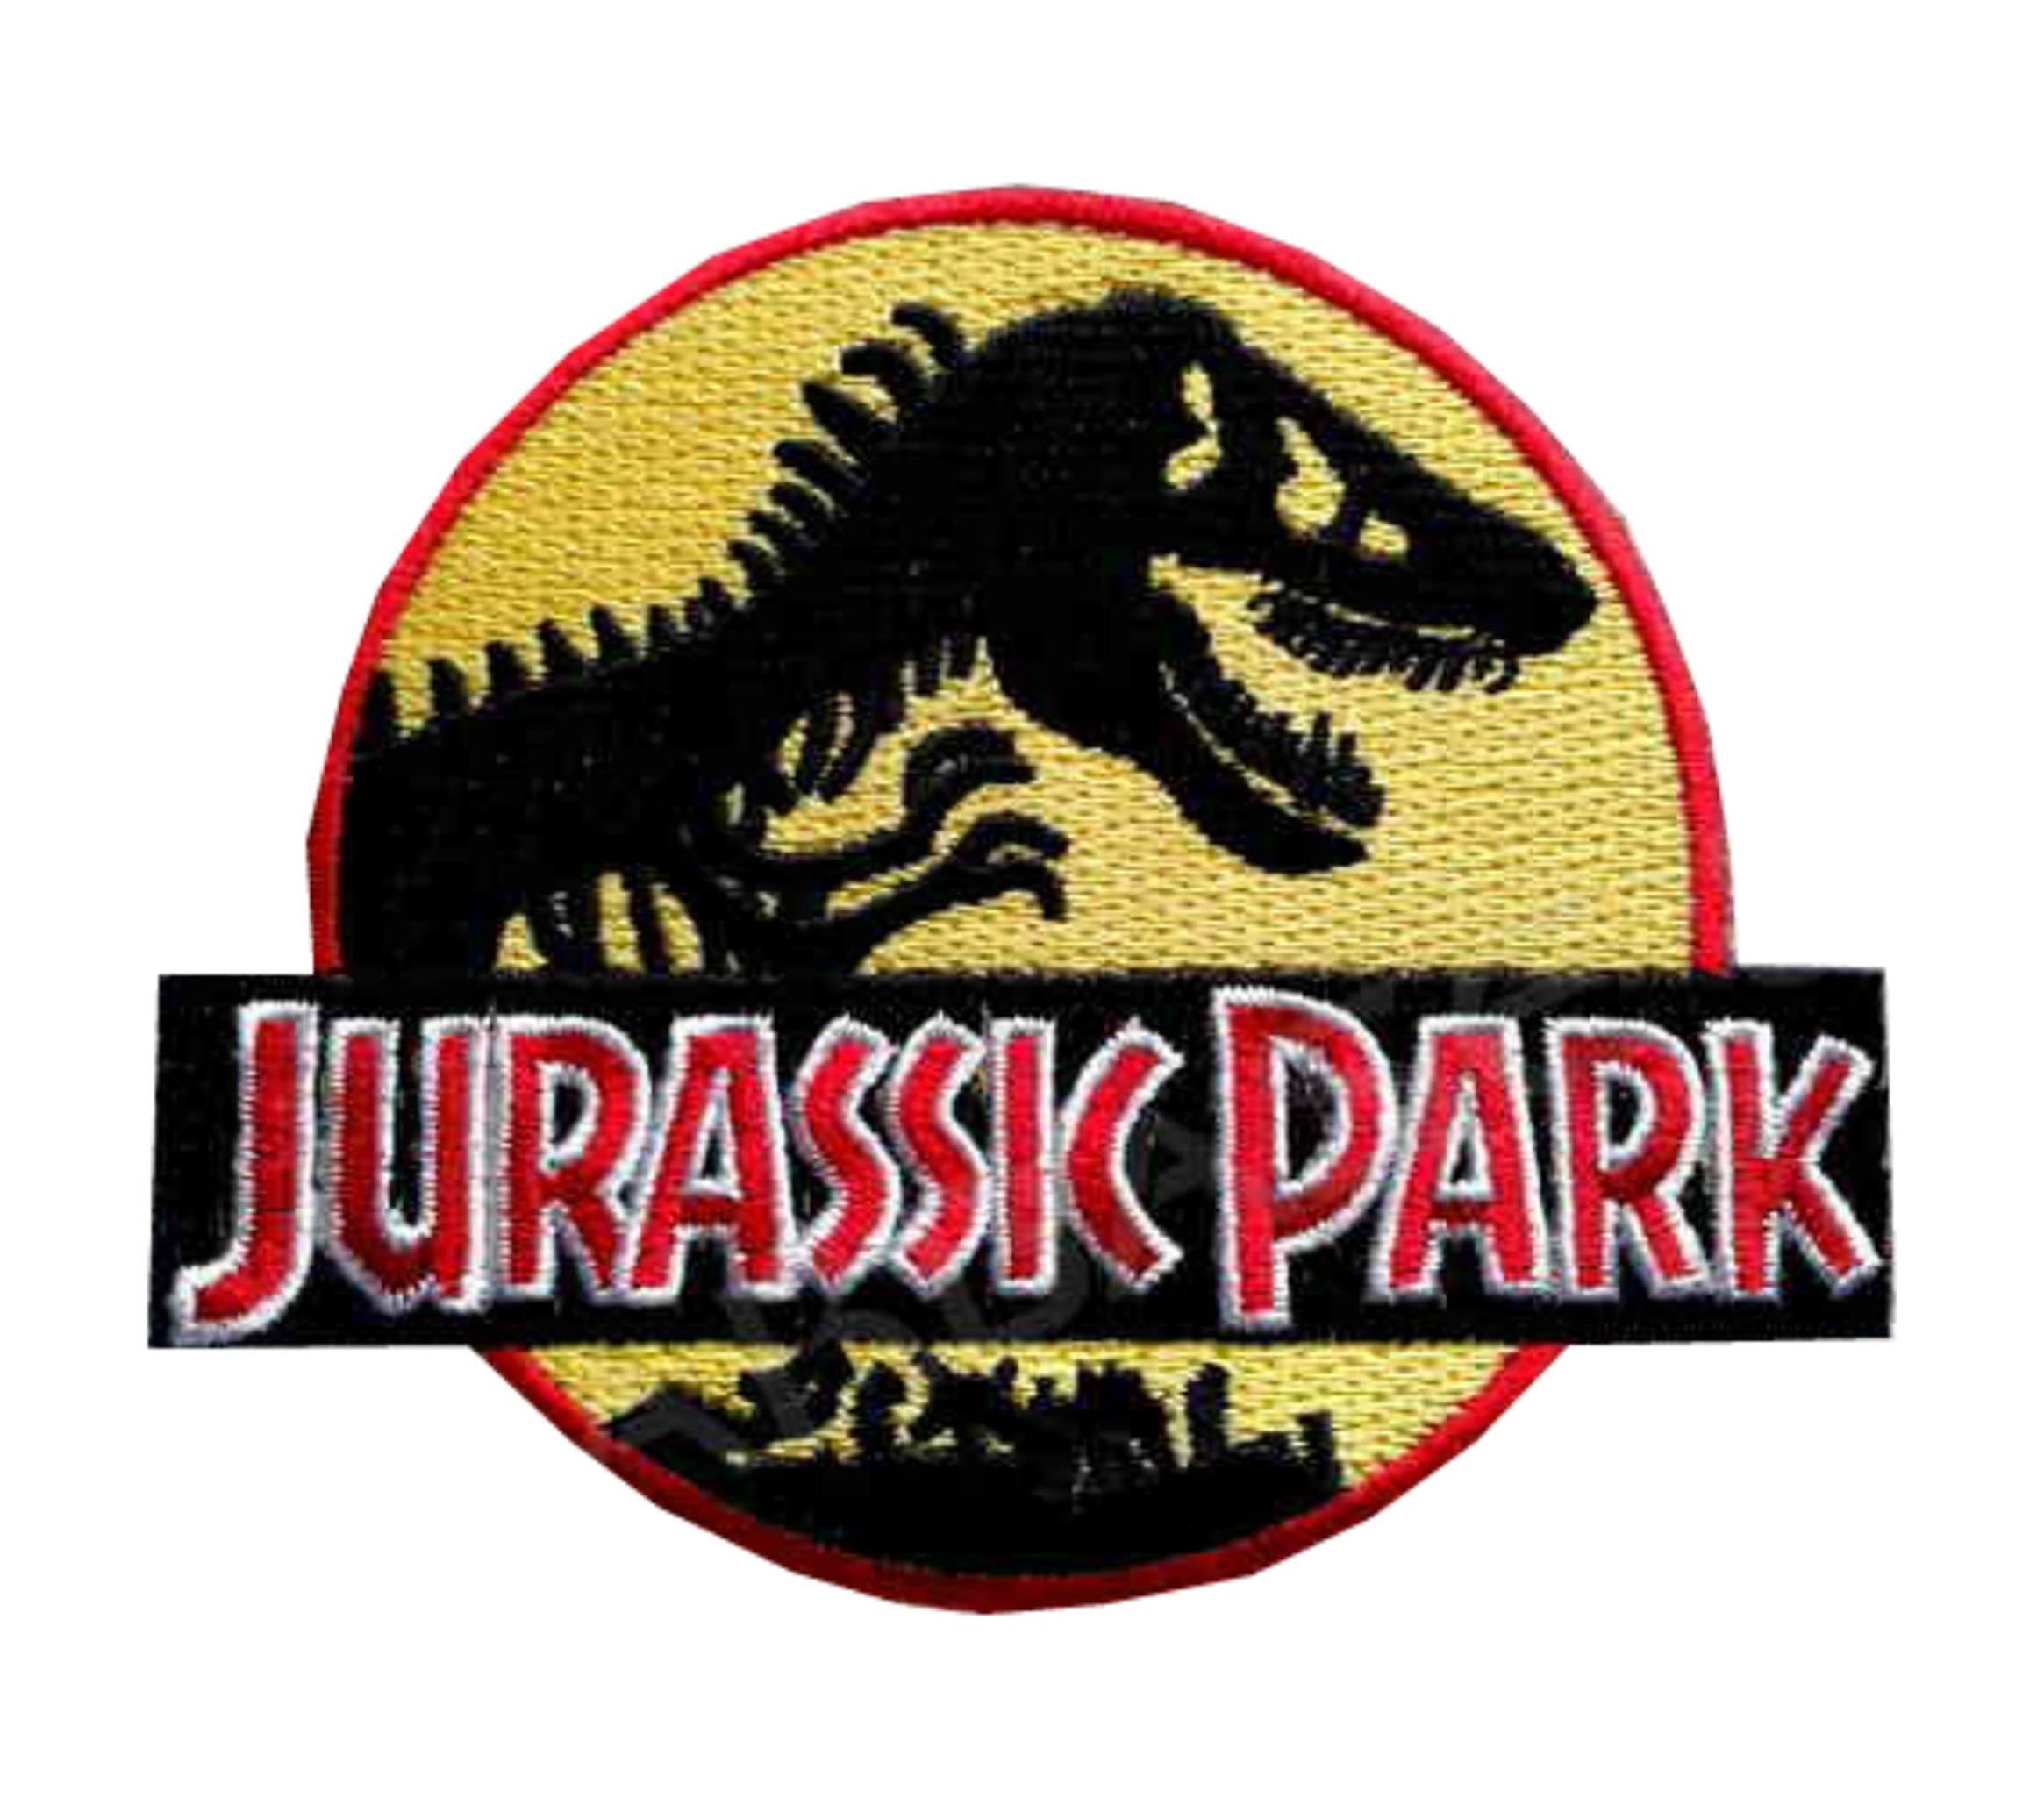 Jurassic Park Movie Logo Embroidered Iron-On Deluxe Patch New Red Applique Patch